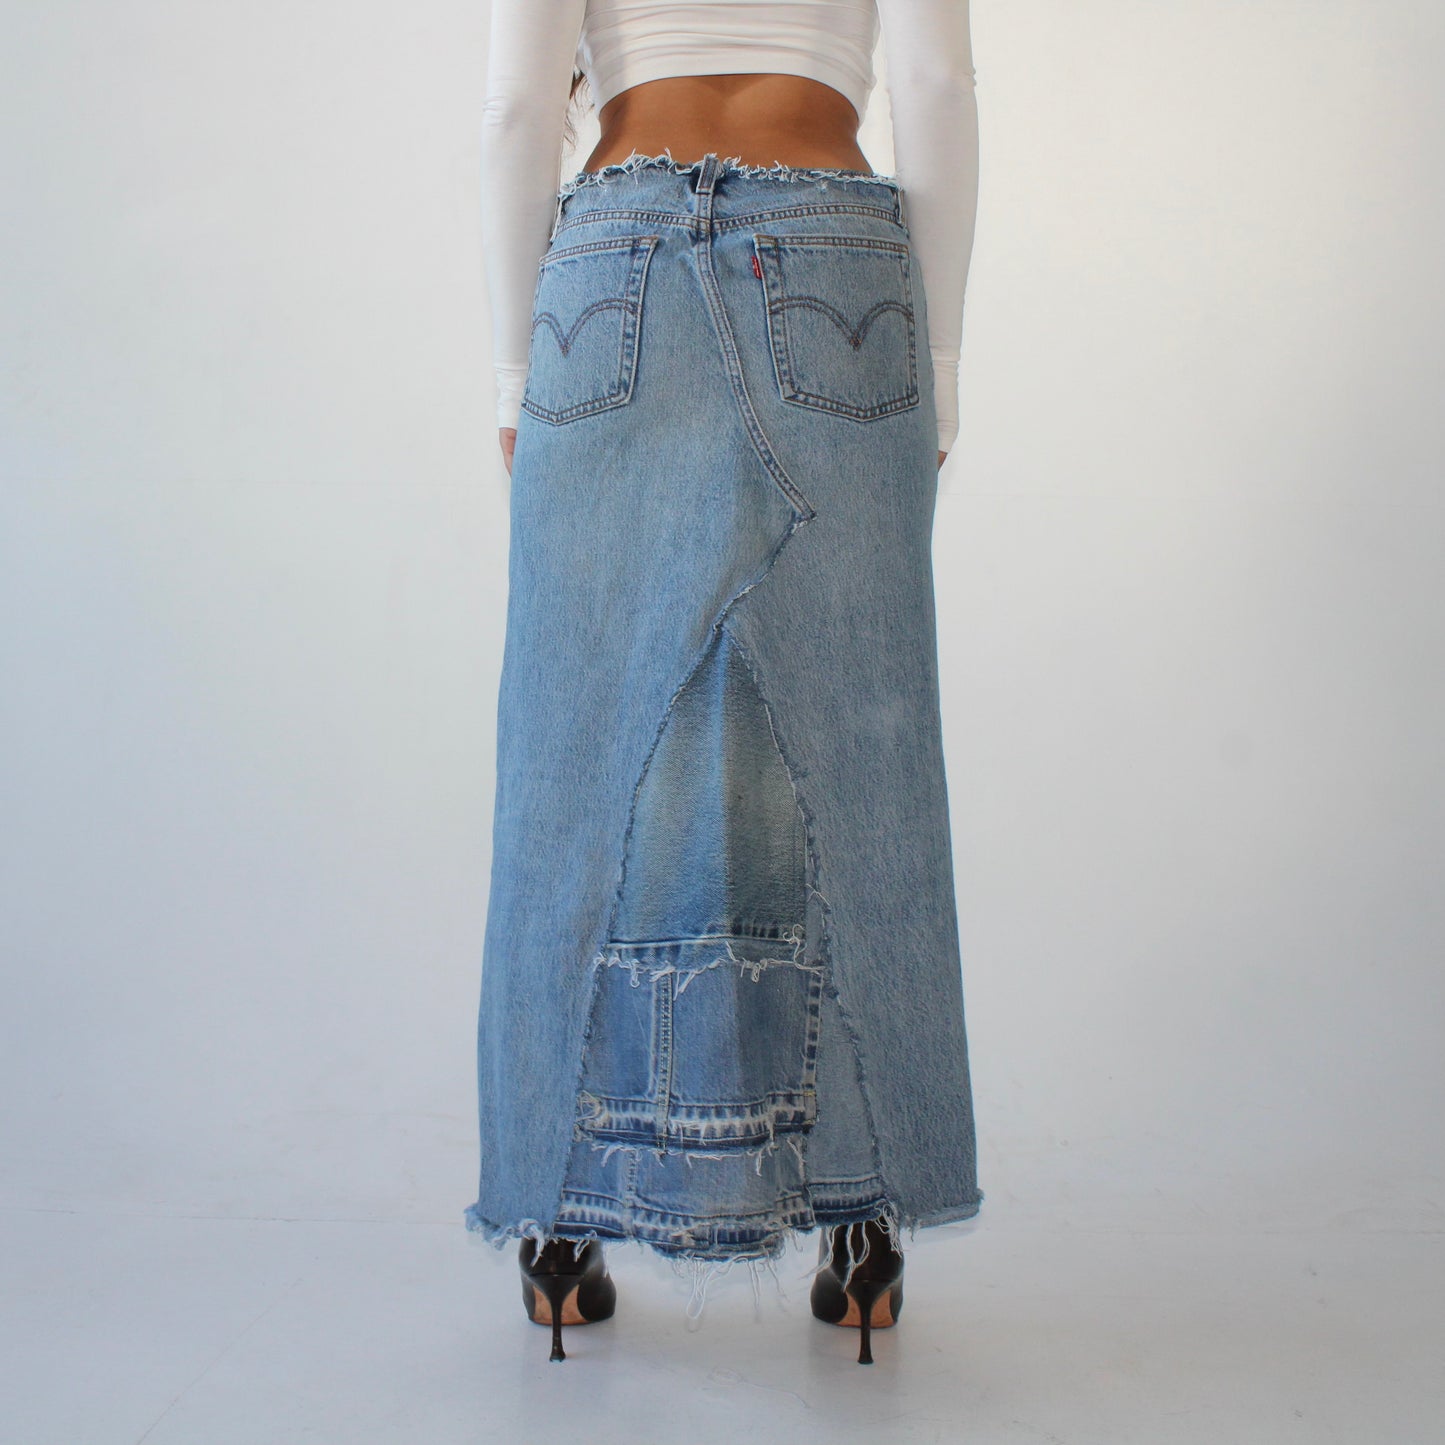 Reworked Patchwork Levi’s Skirt